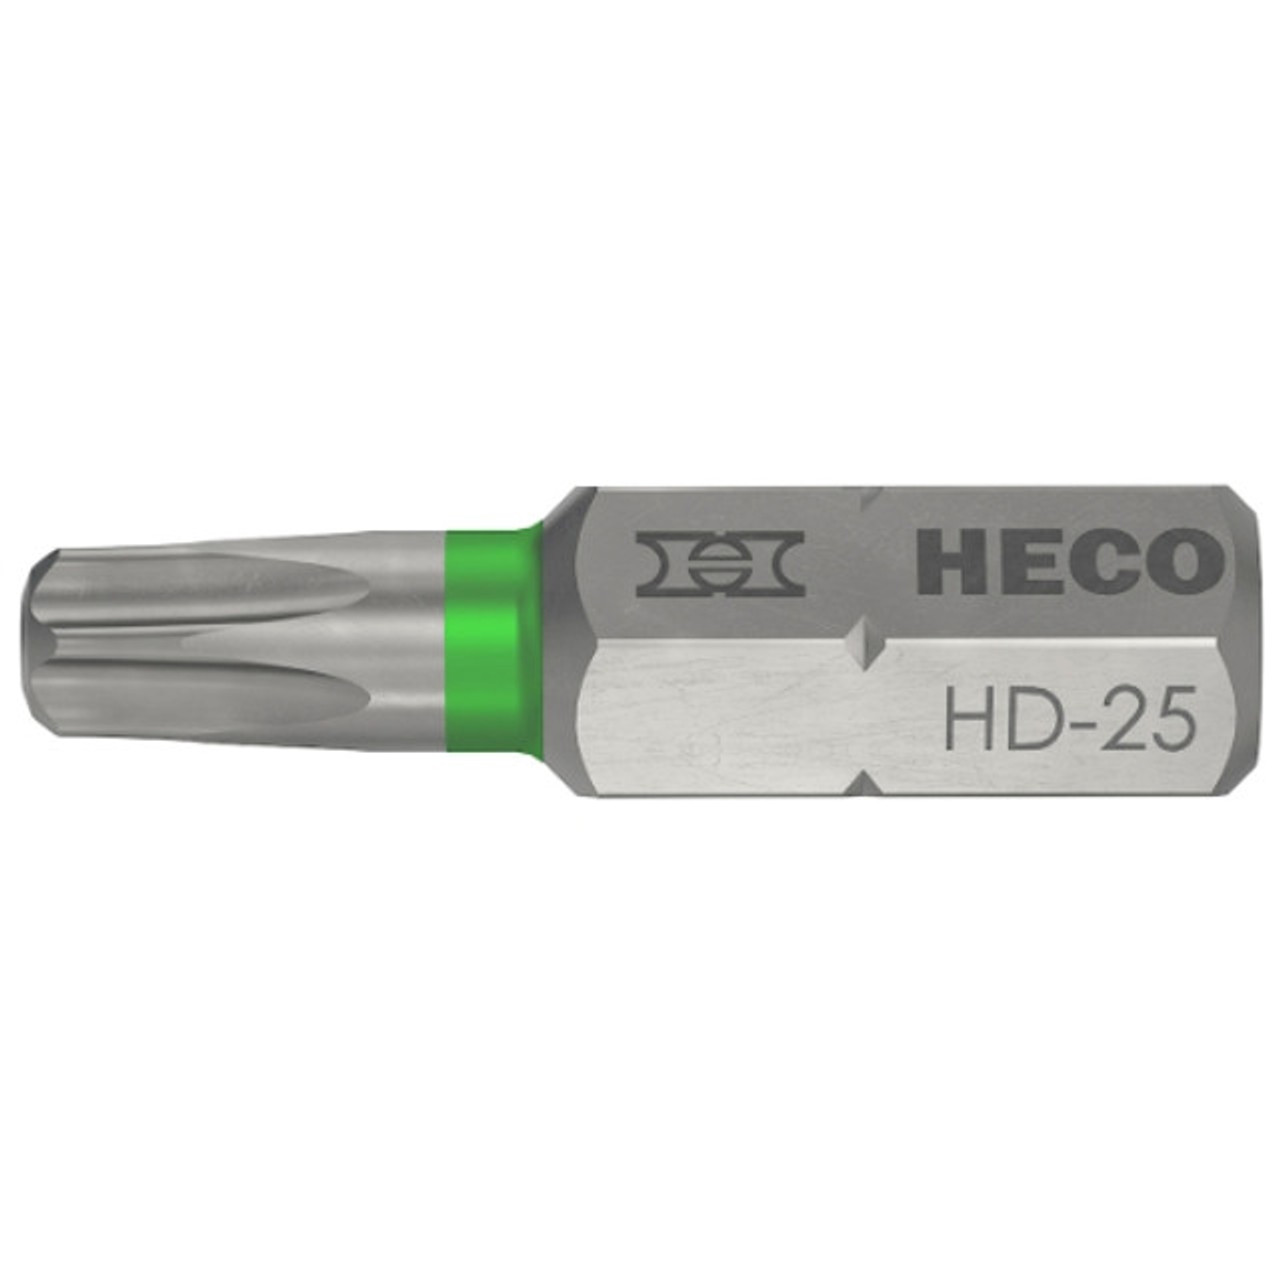 HECO Schrauben Drive Bits | Pack of 2 T25 / HD25 Drive Bits for Torx Drive, Deck Building, Carpentry, Coastal Construction, Trade Supplies and Deck Builders